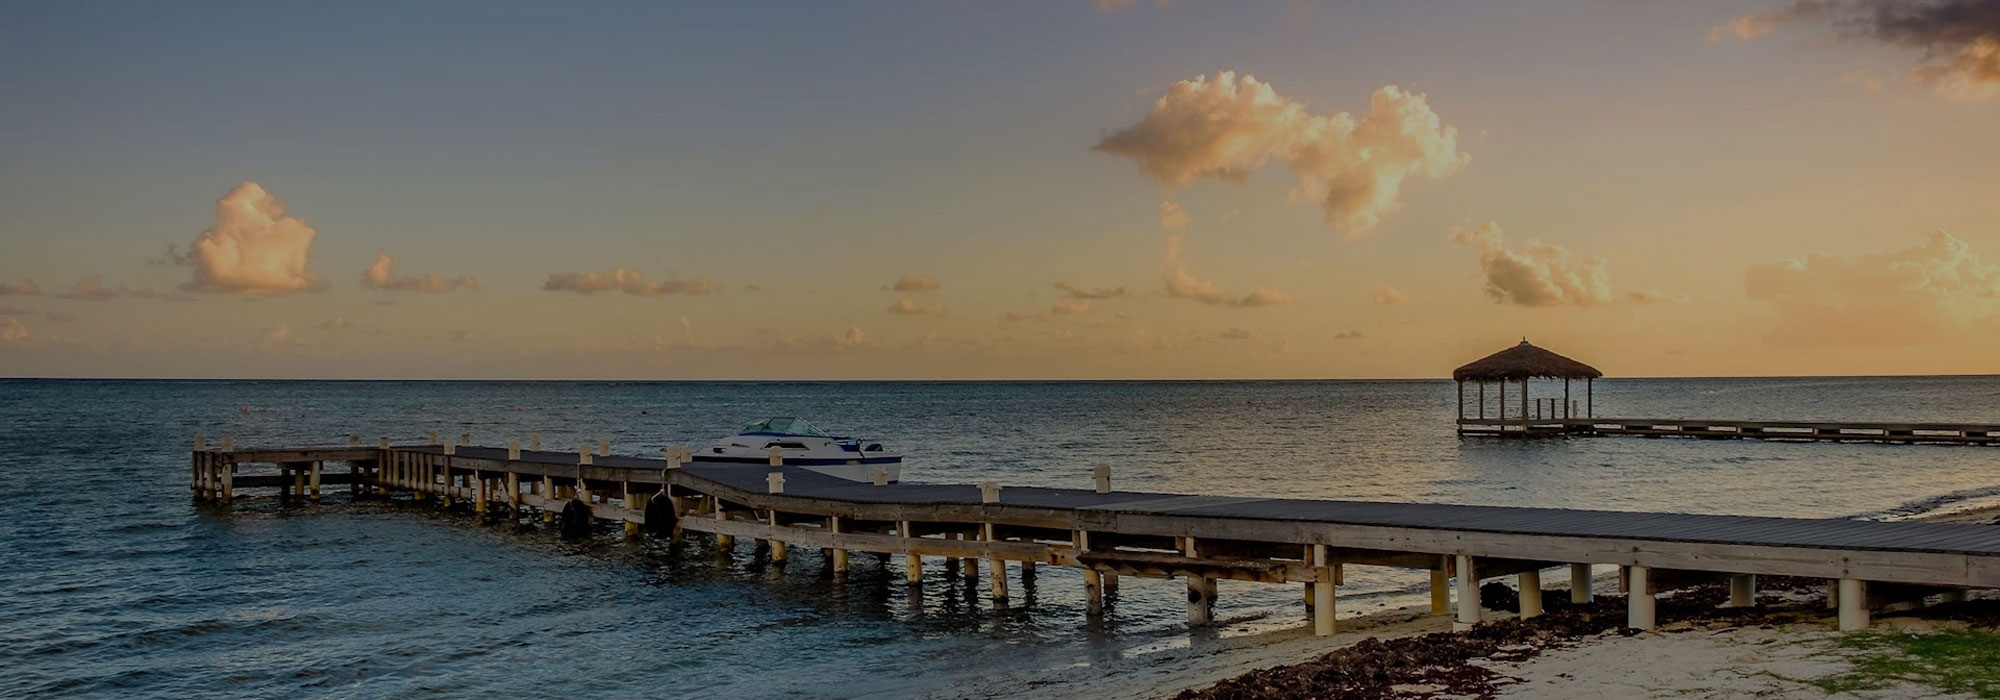 The Best Neighborhoods for Retirement in the Cayman Islands